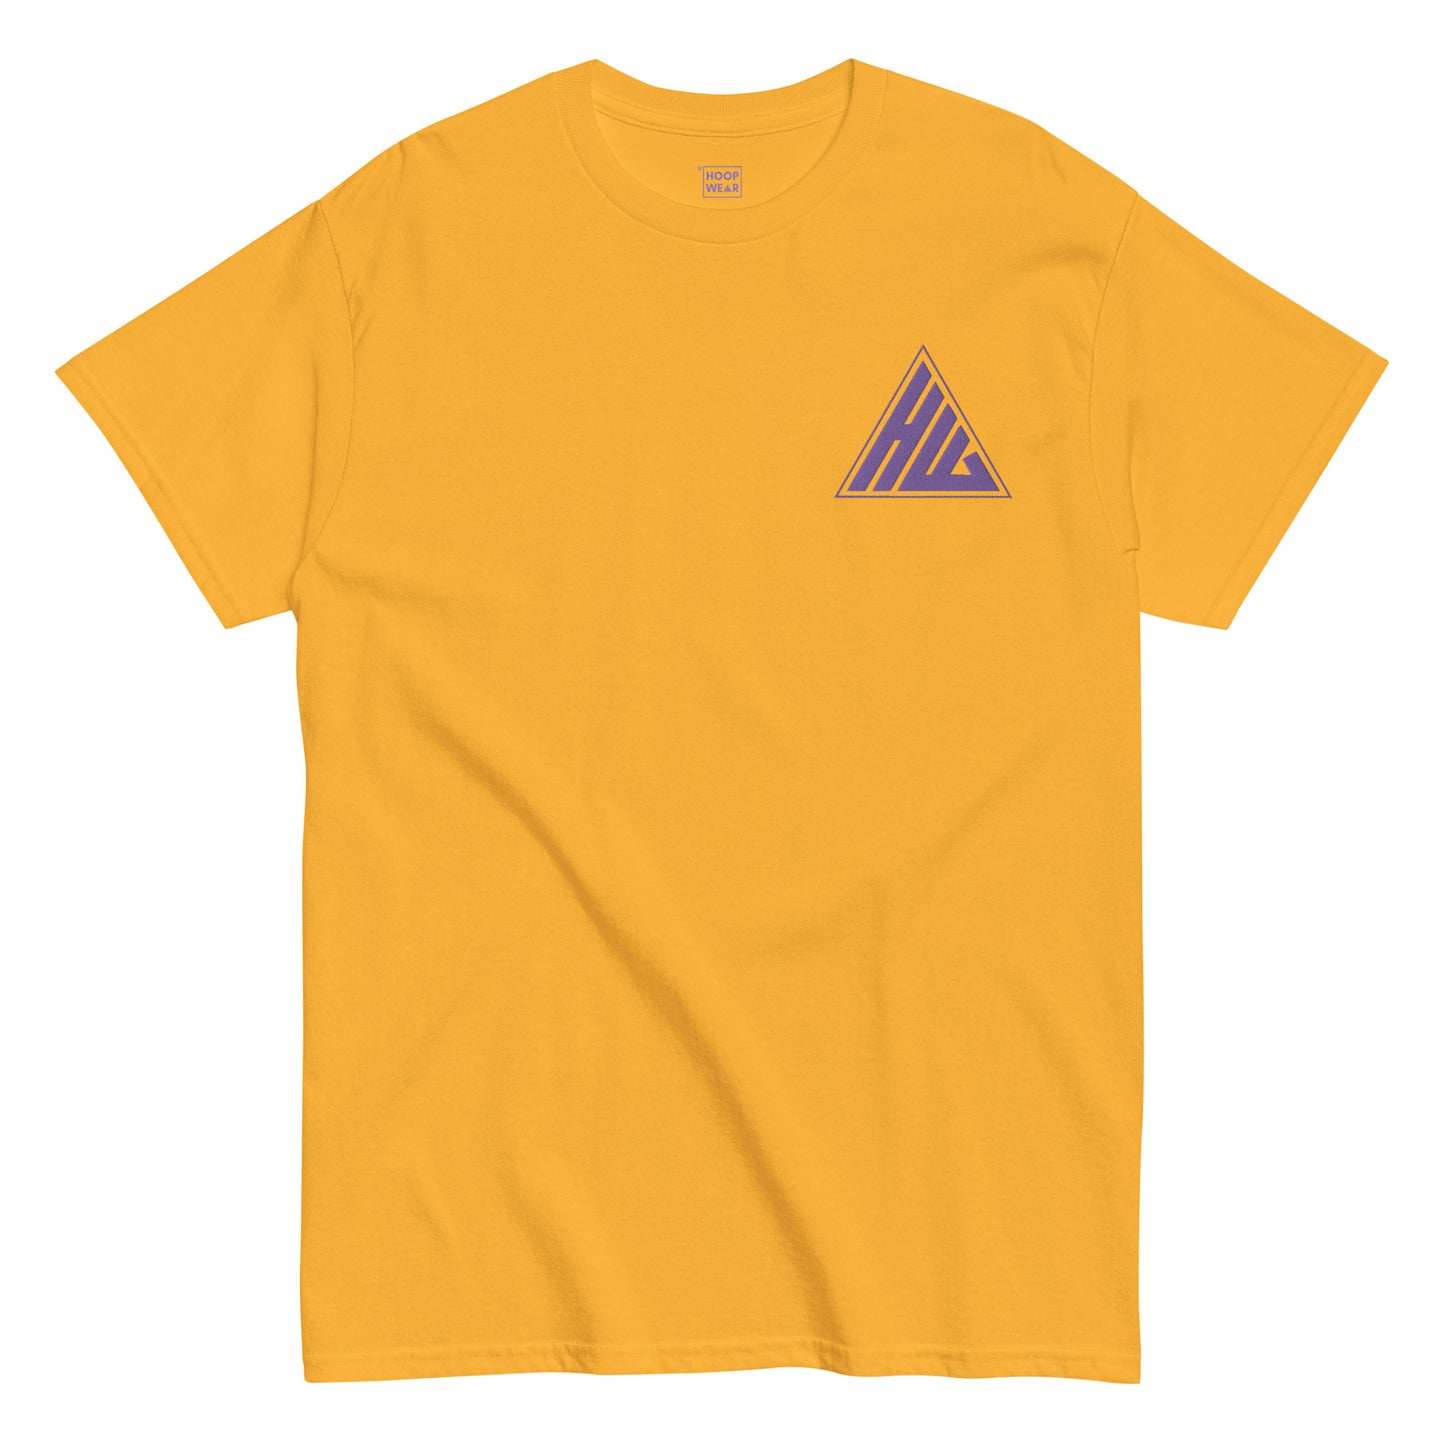 “Job's Not Finished” Embroidered T-shirt - Yellow